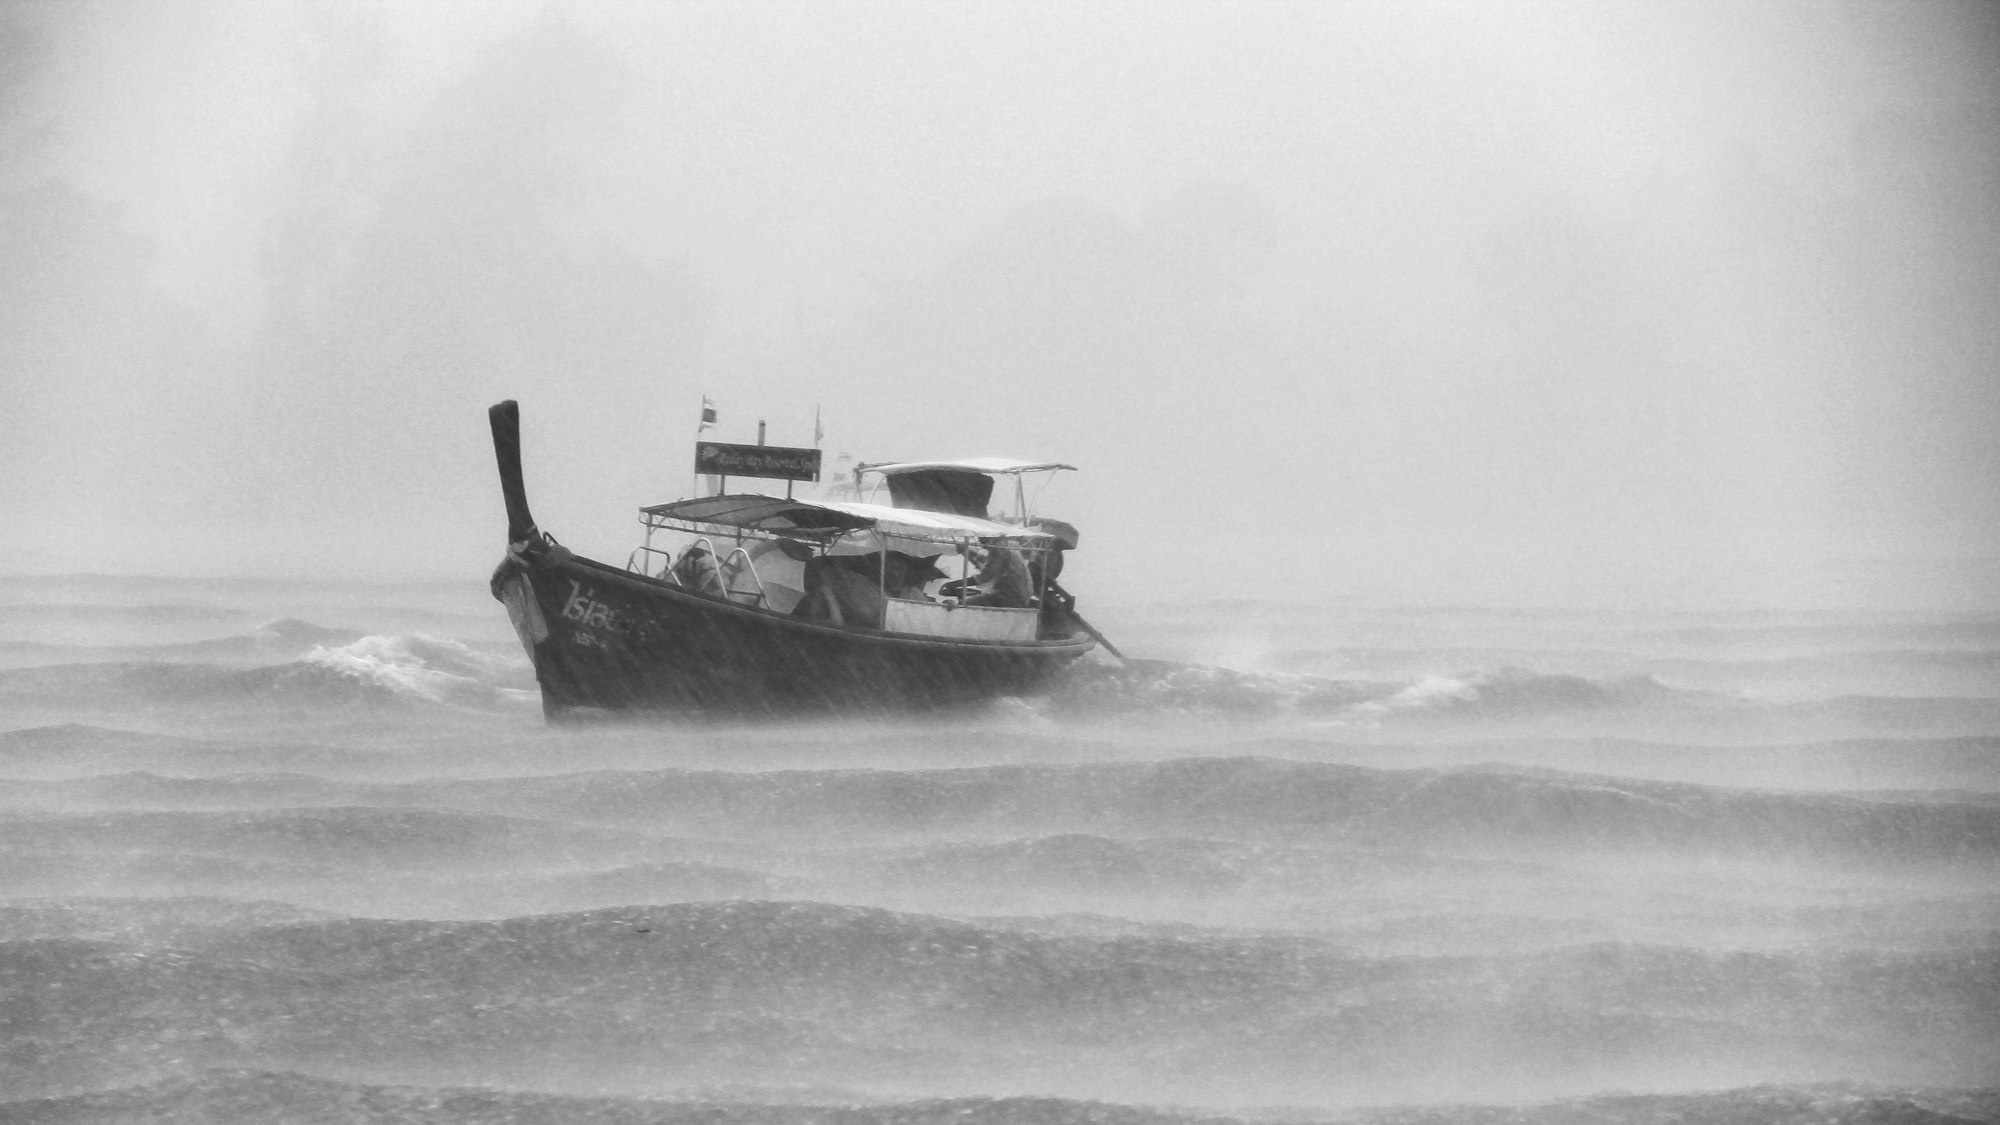 Drop the anchor when your boat is in the middle of a storm and wait for it to pass. Don't panic.